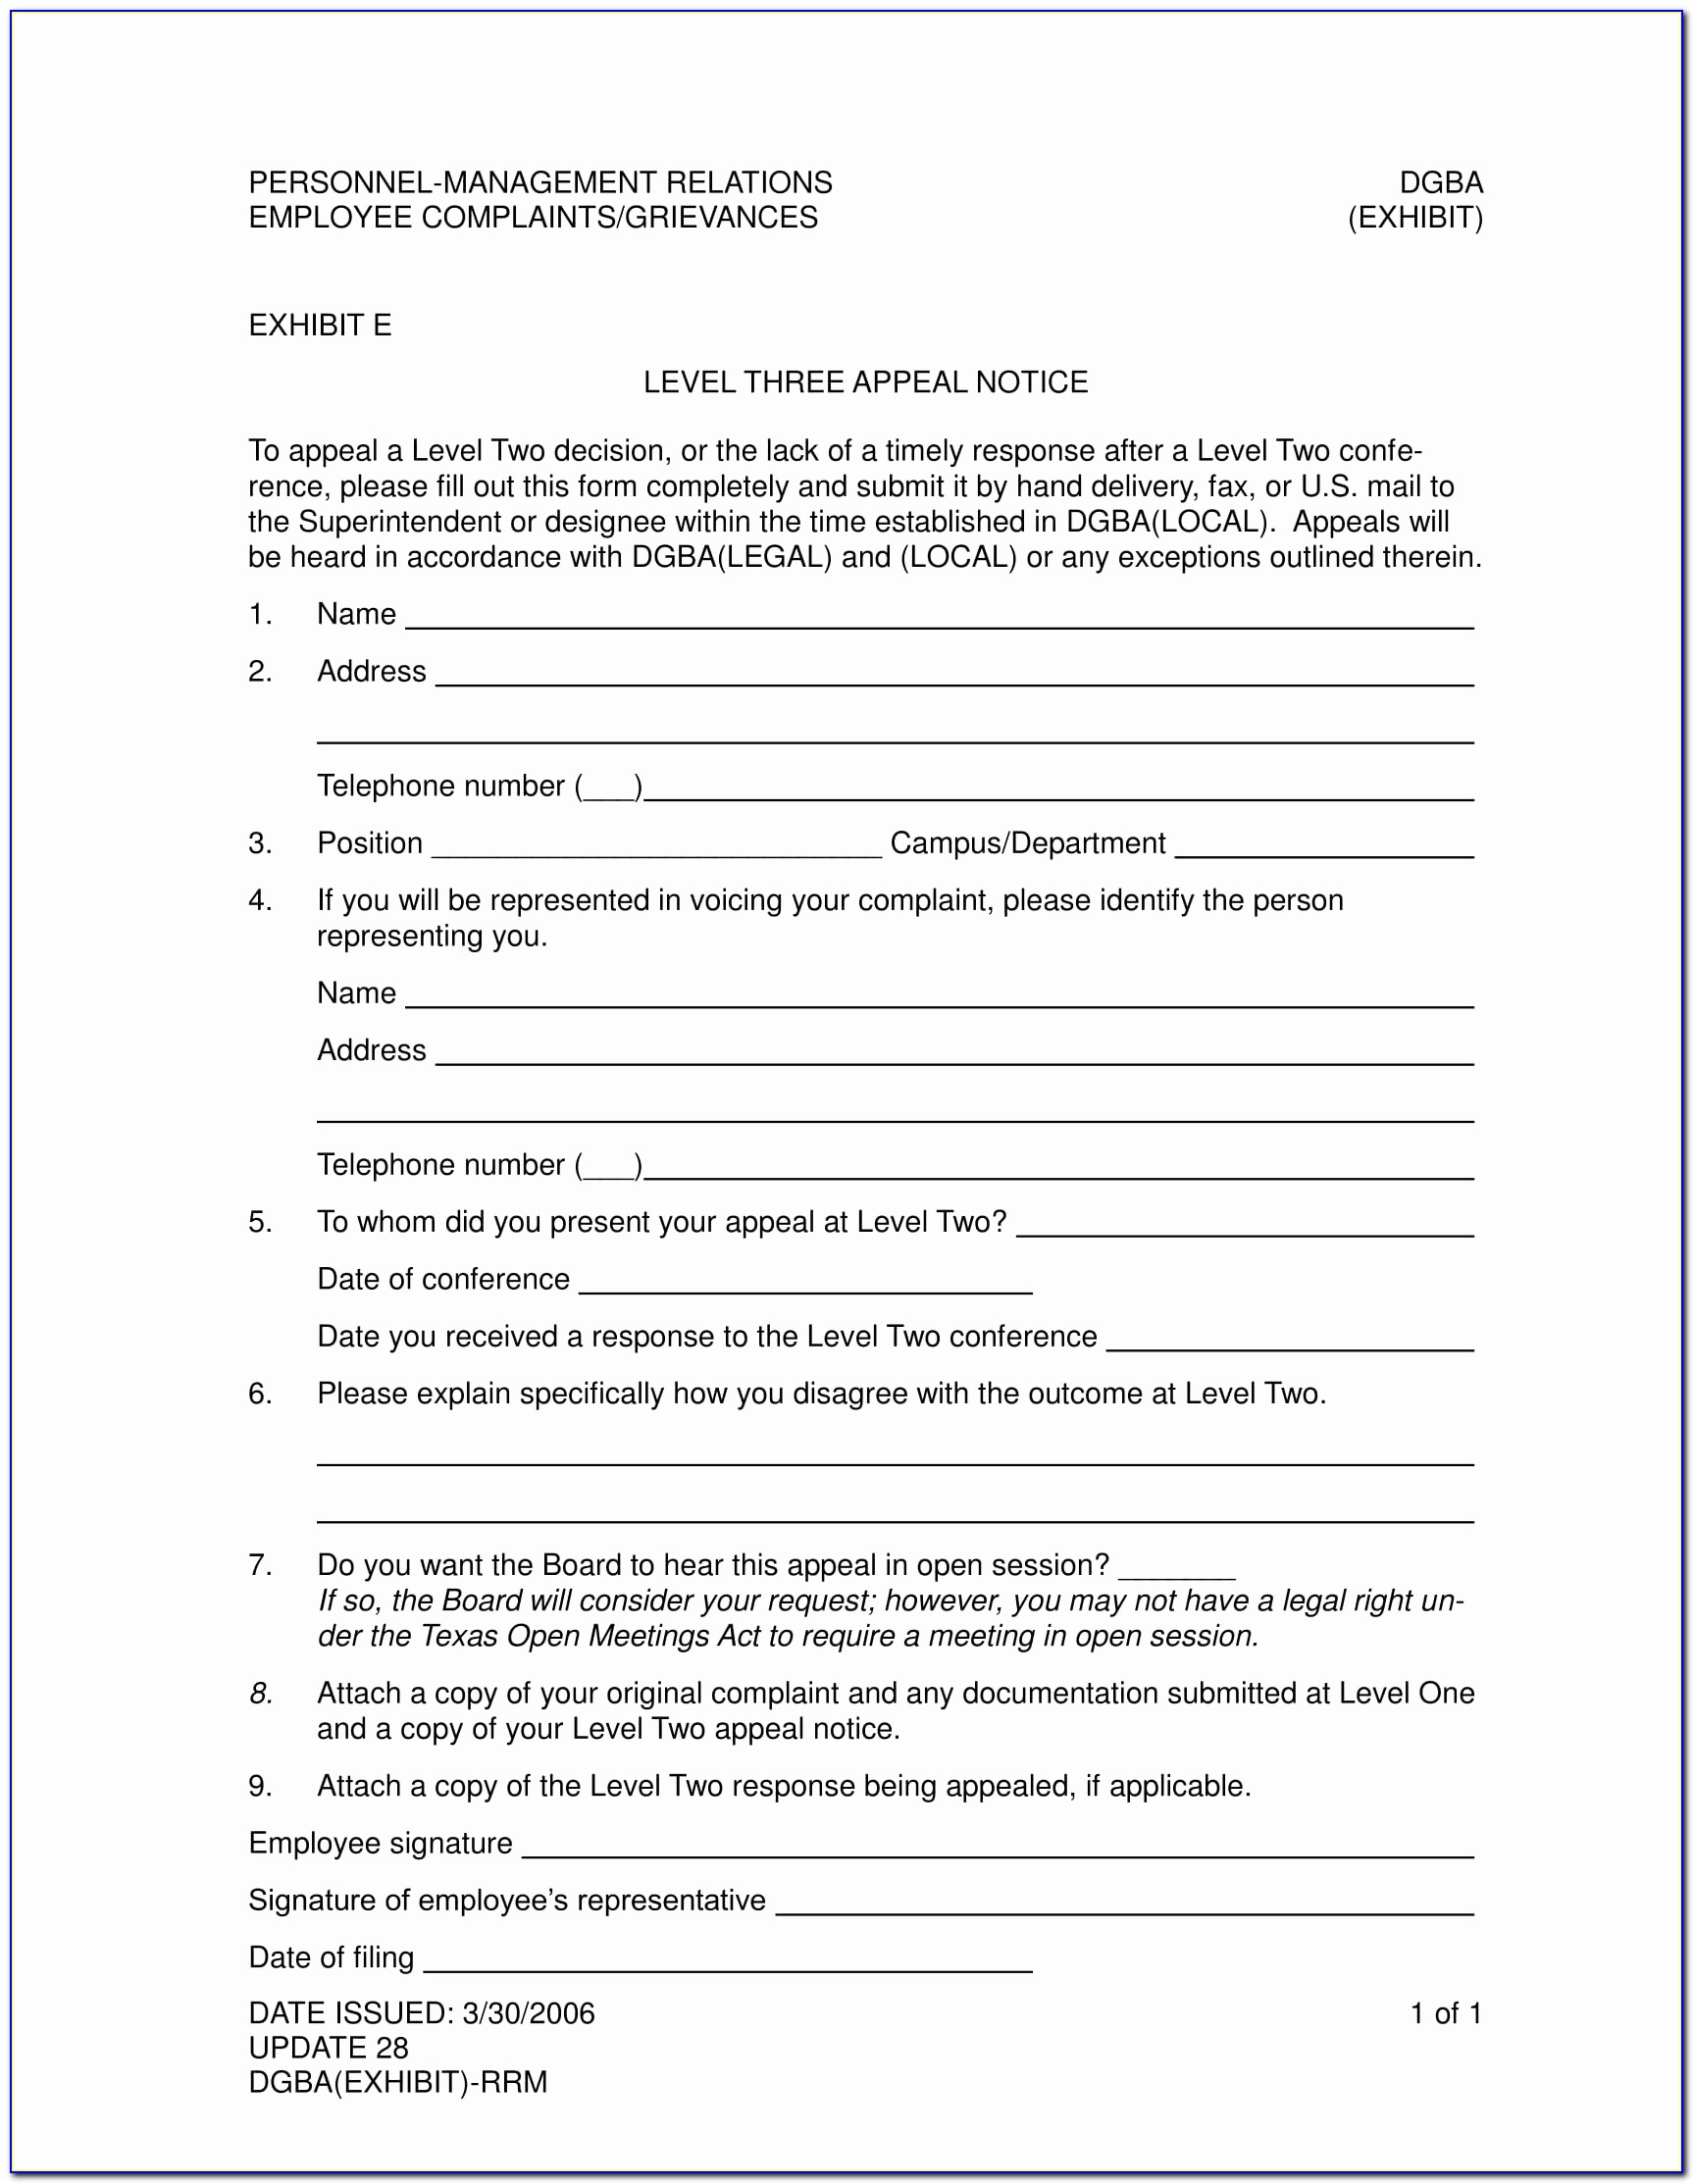 Fmla Intermittent Leave Tracking Form Elegant Dol Fmla Forms 2016 Findings The Worst Forms Child Labor